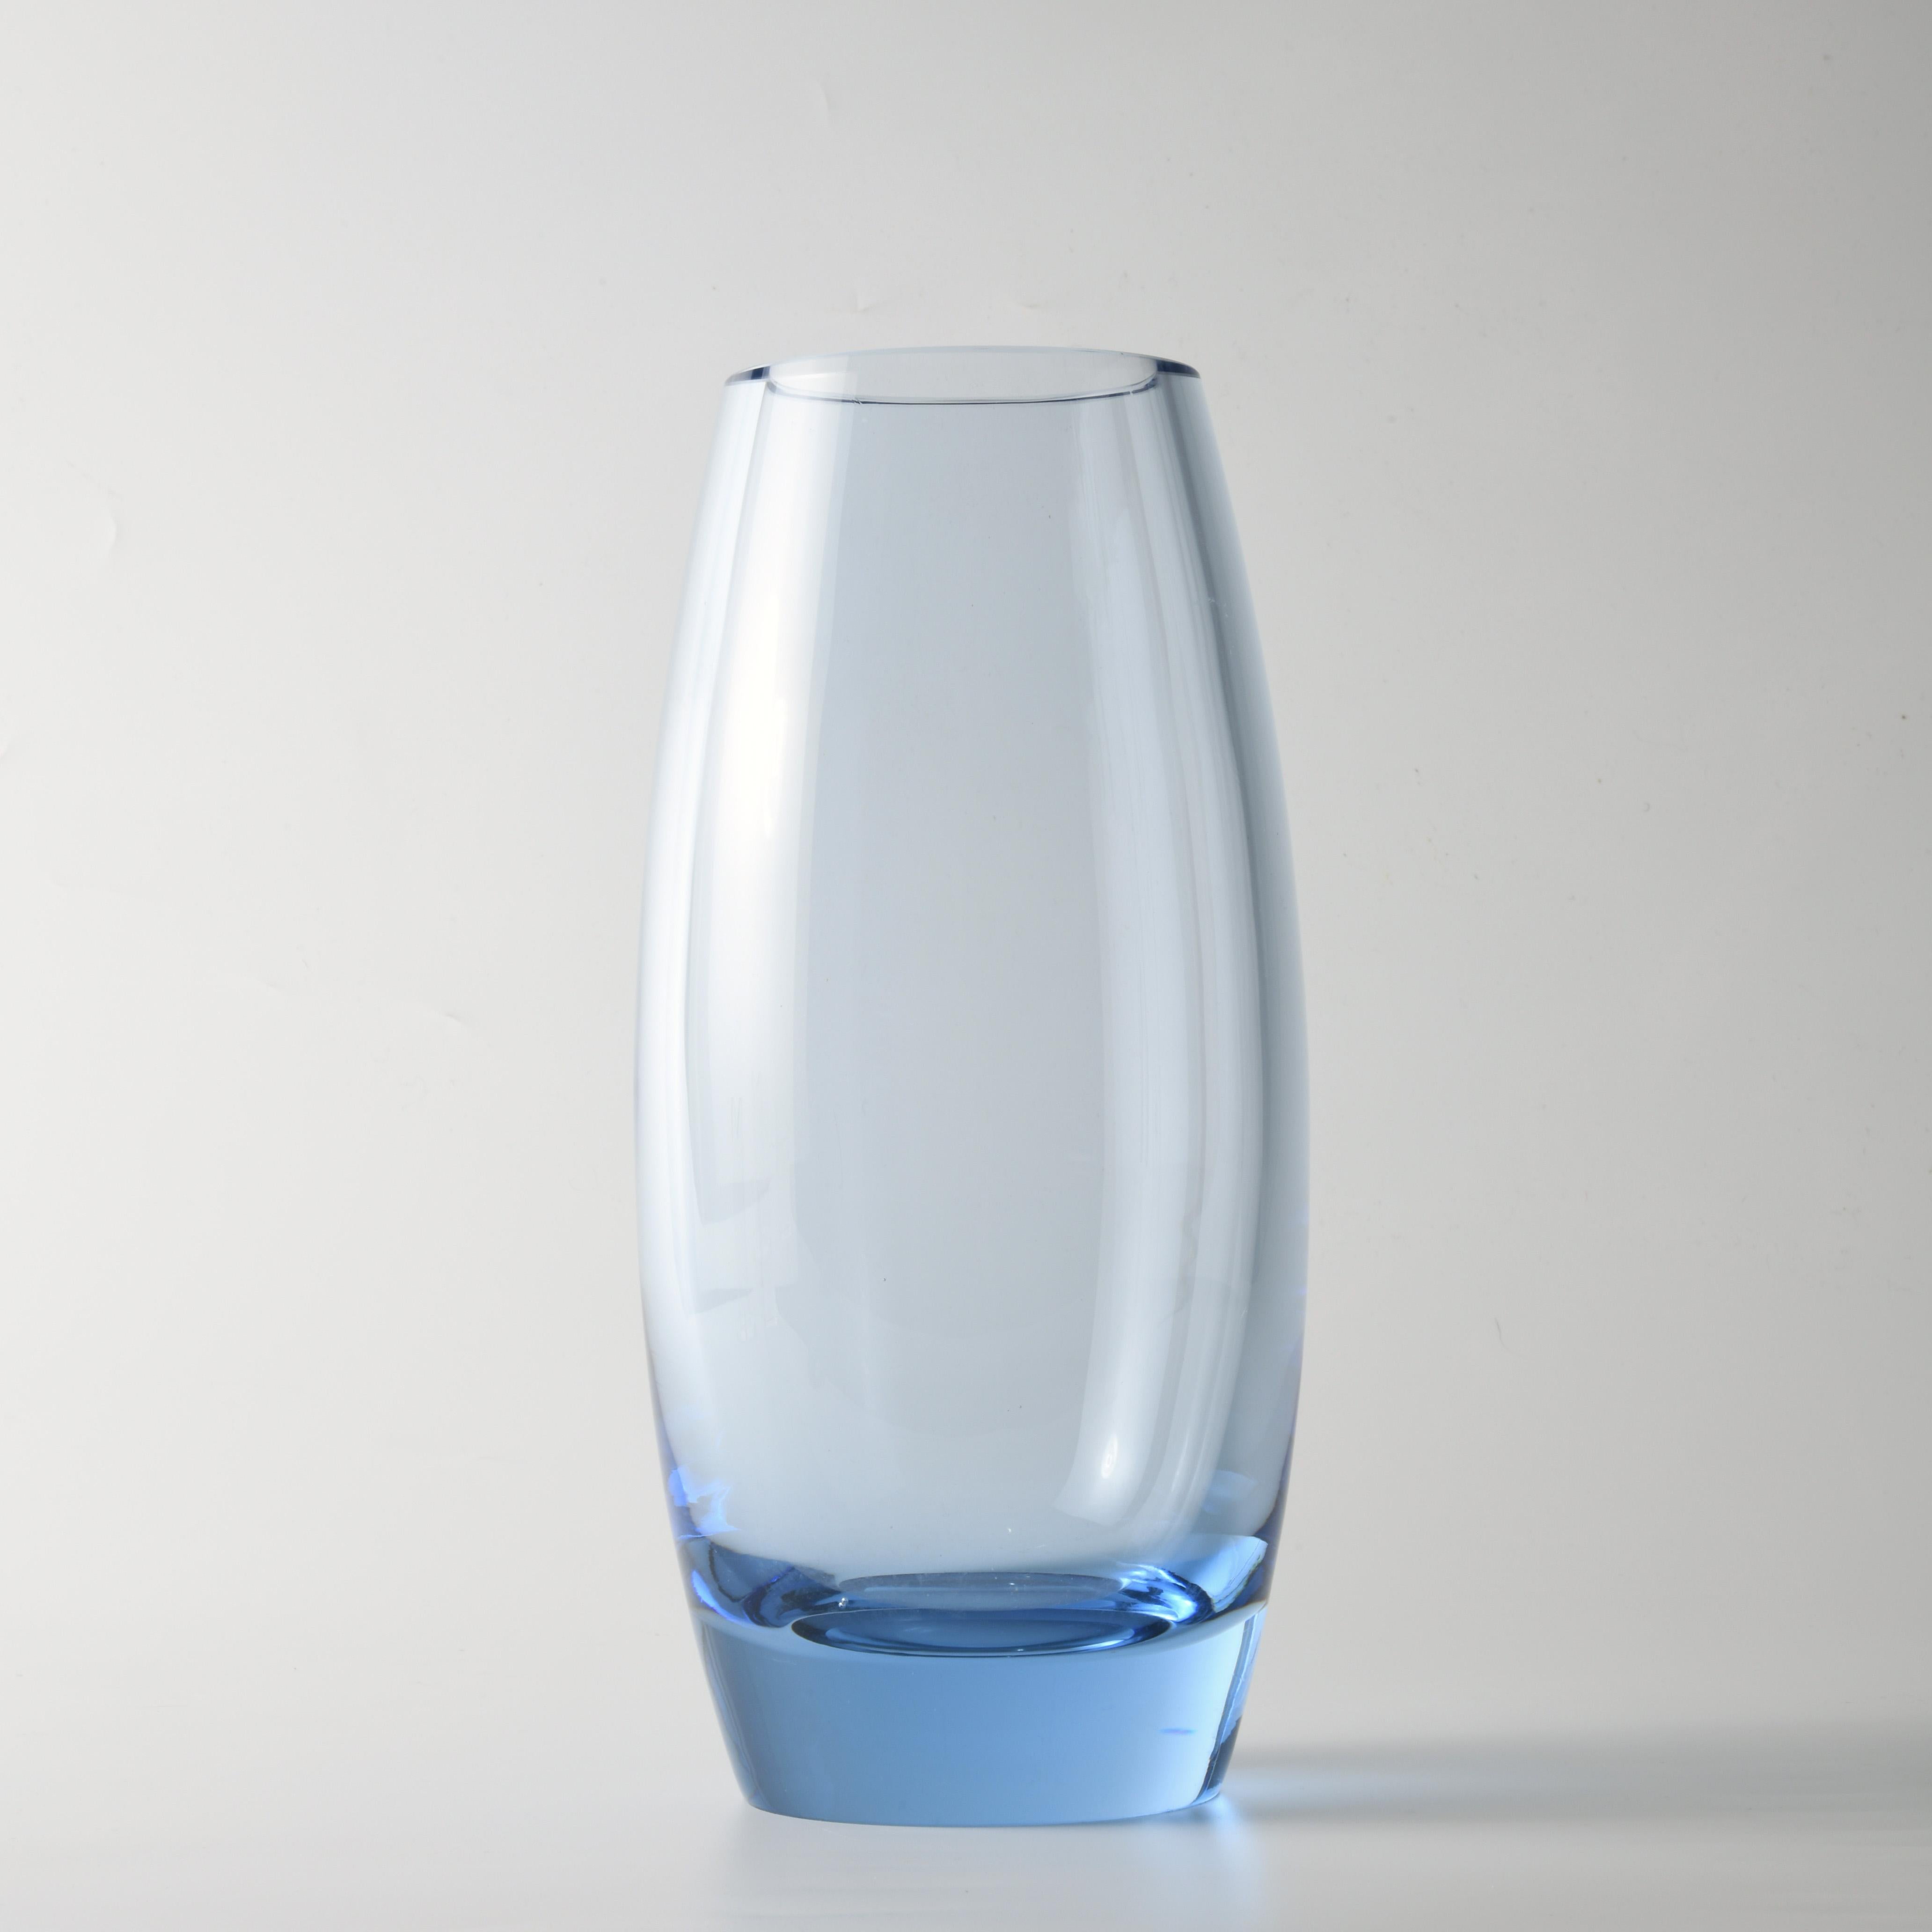 Glass vase (H:25cm), design by Per Lutken (1916-1998), published by the famous Danish glassworks Holmegaard. The bluish tone, the thickness of the glass visible at the top is an integral part of the design of this vase, dated and signed